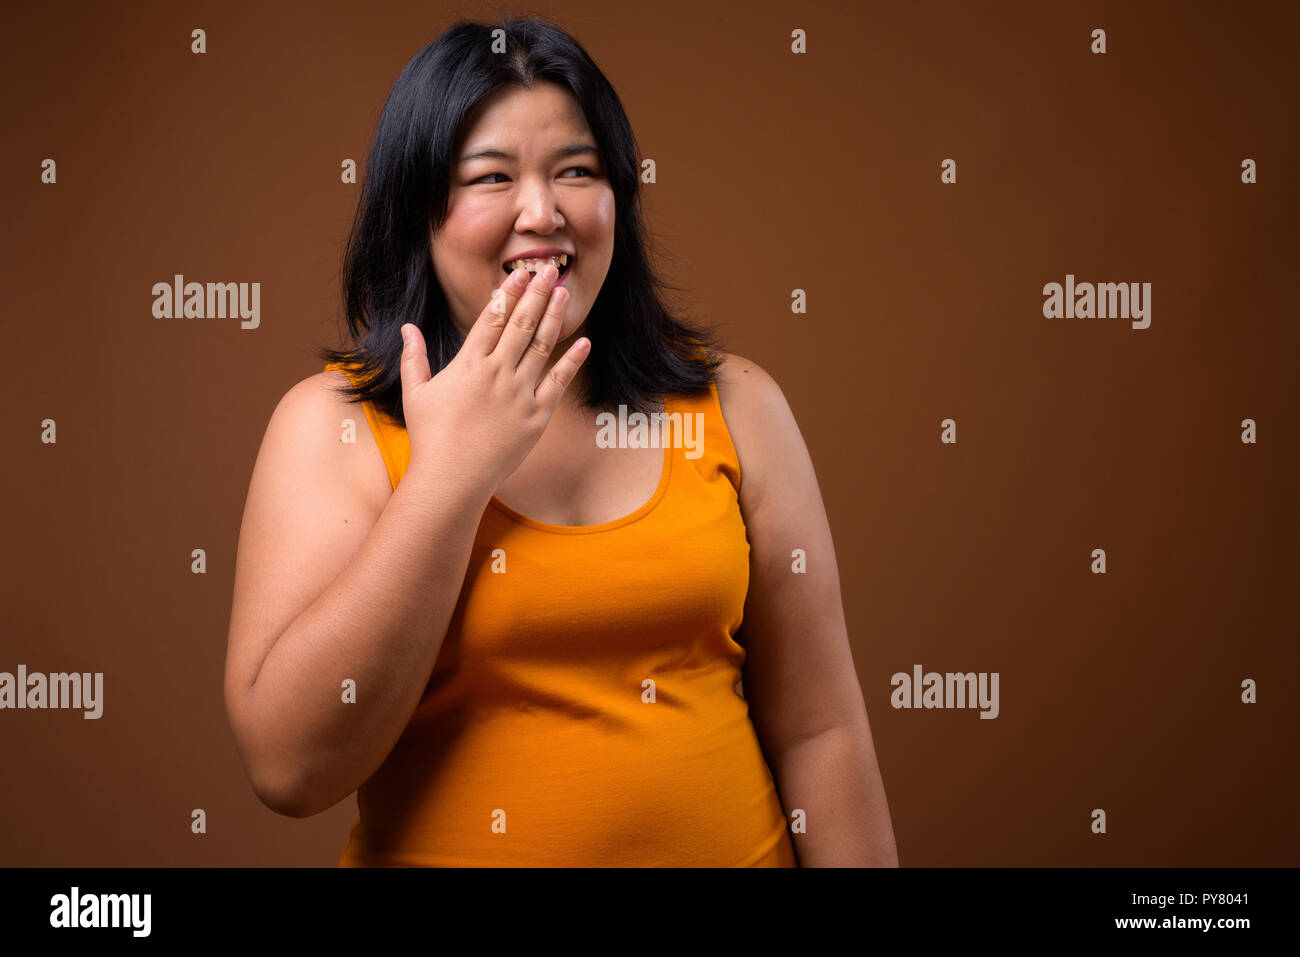 Happy overweight Asian woman laughing and covering mouth Stock Photo